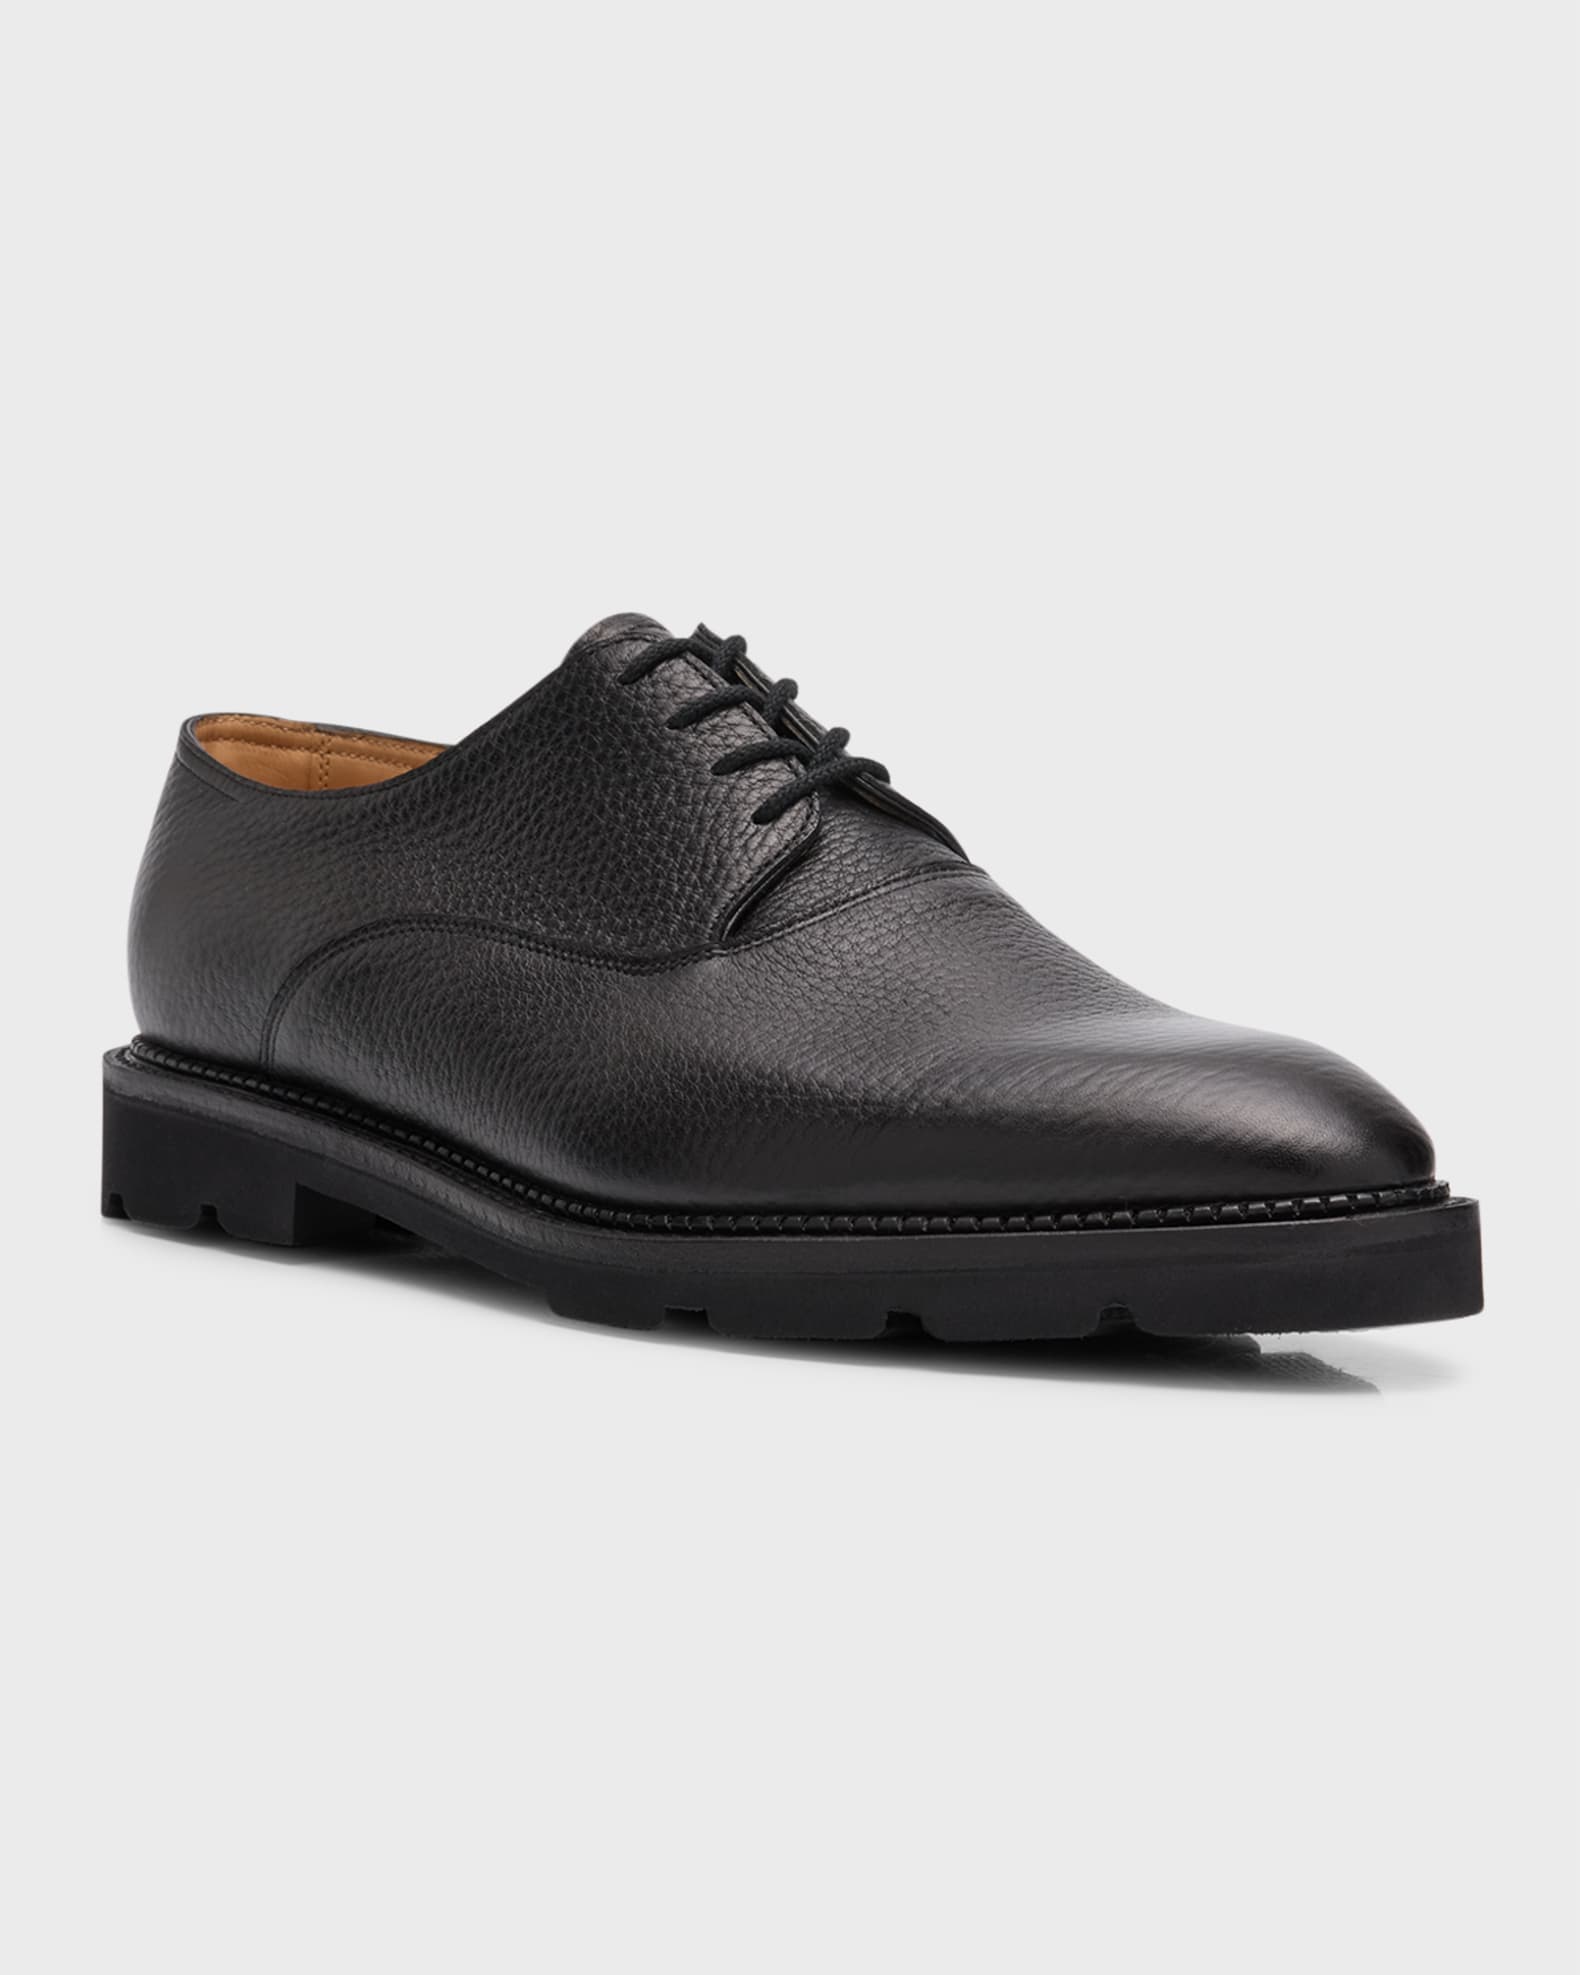 Men's Zennor Grained Leather Derby Shoes